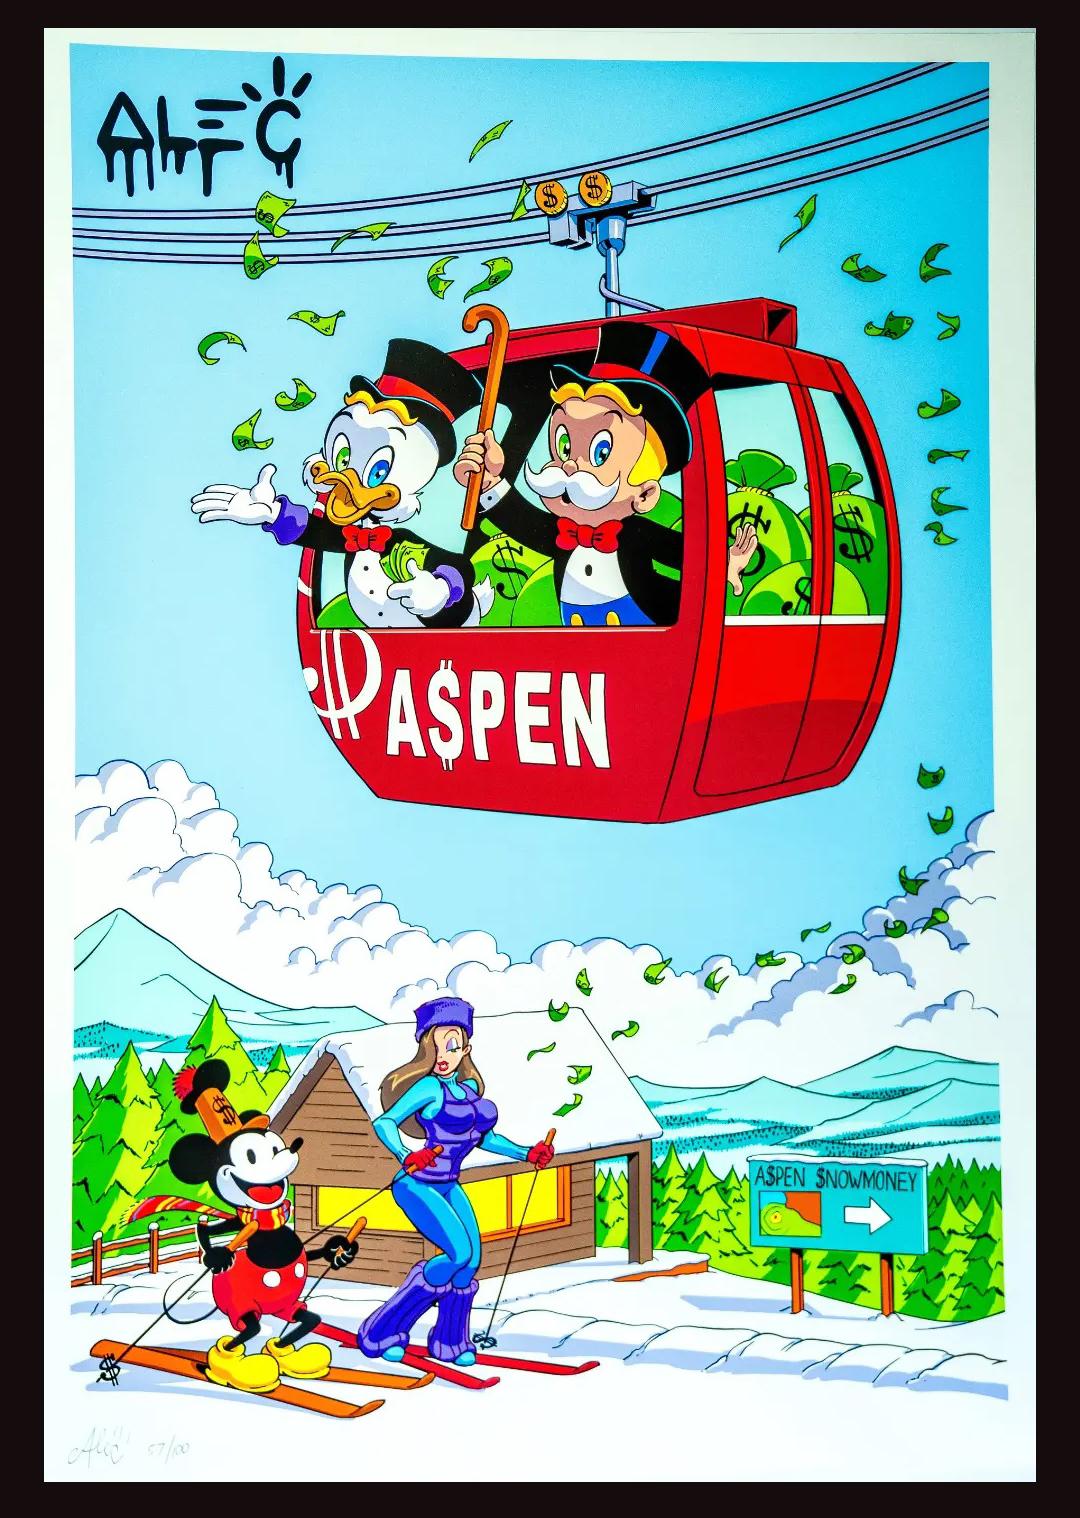 Artist: Alec Monopoly.
Title: "Aspen Snow Day"
Year: 2022
Medium: Giclee on paper.
Edition: of 200
Signed and numbered in pencil by the artist.
Size: 31" x 22".
In Excellent condition.
Certificate of Authenticity is included.

Alec Monopoly